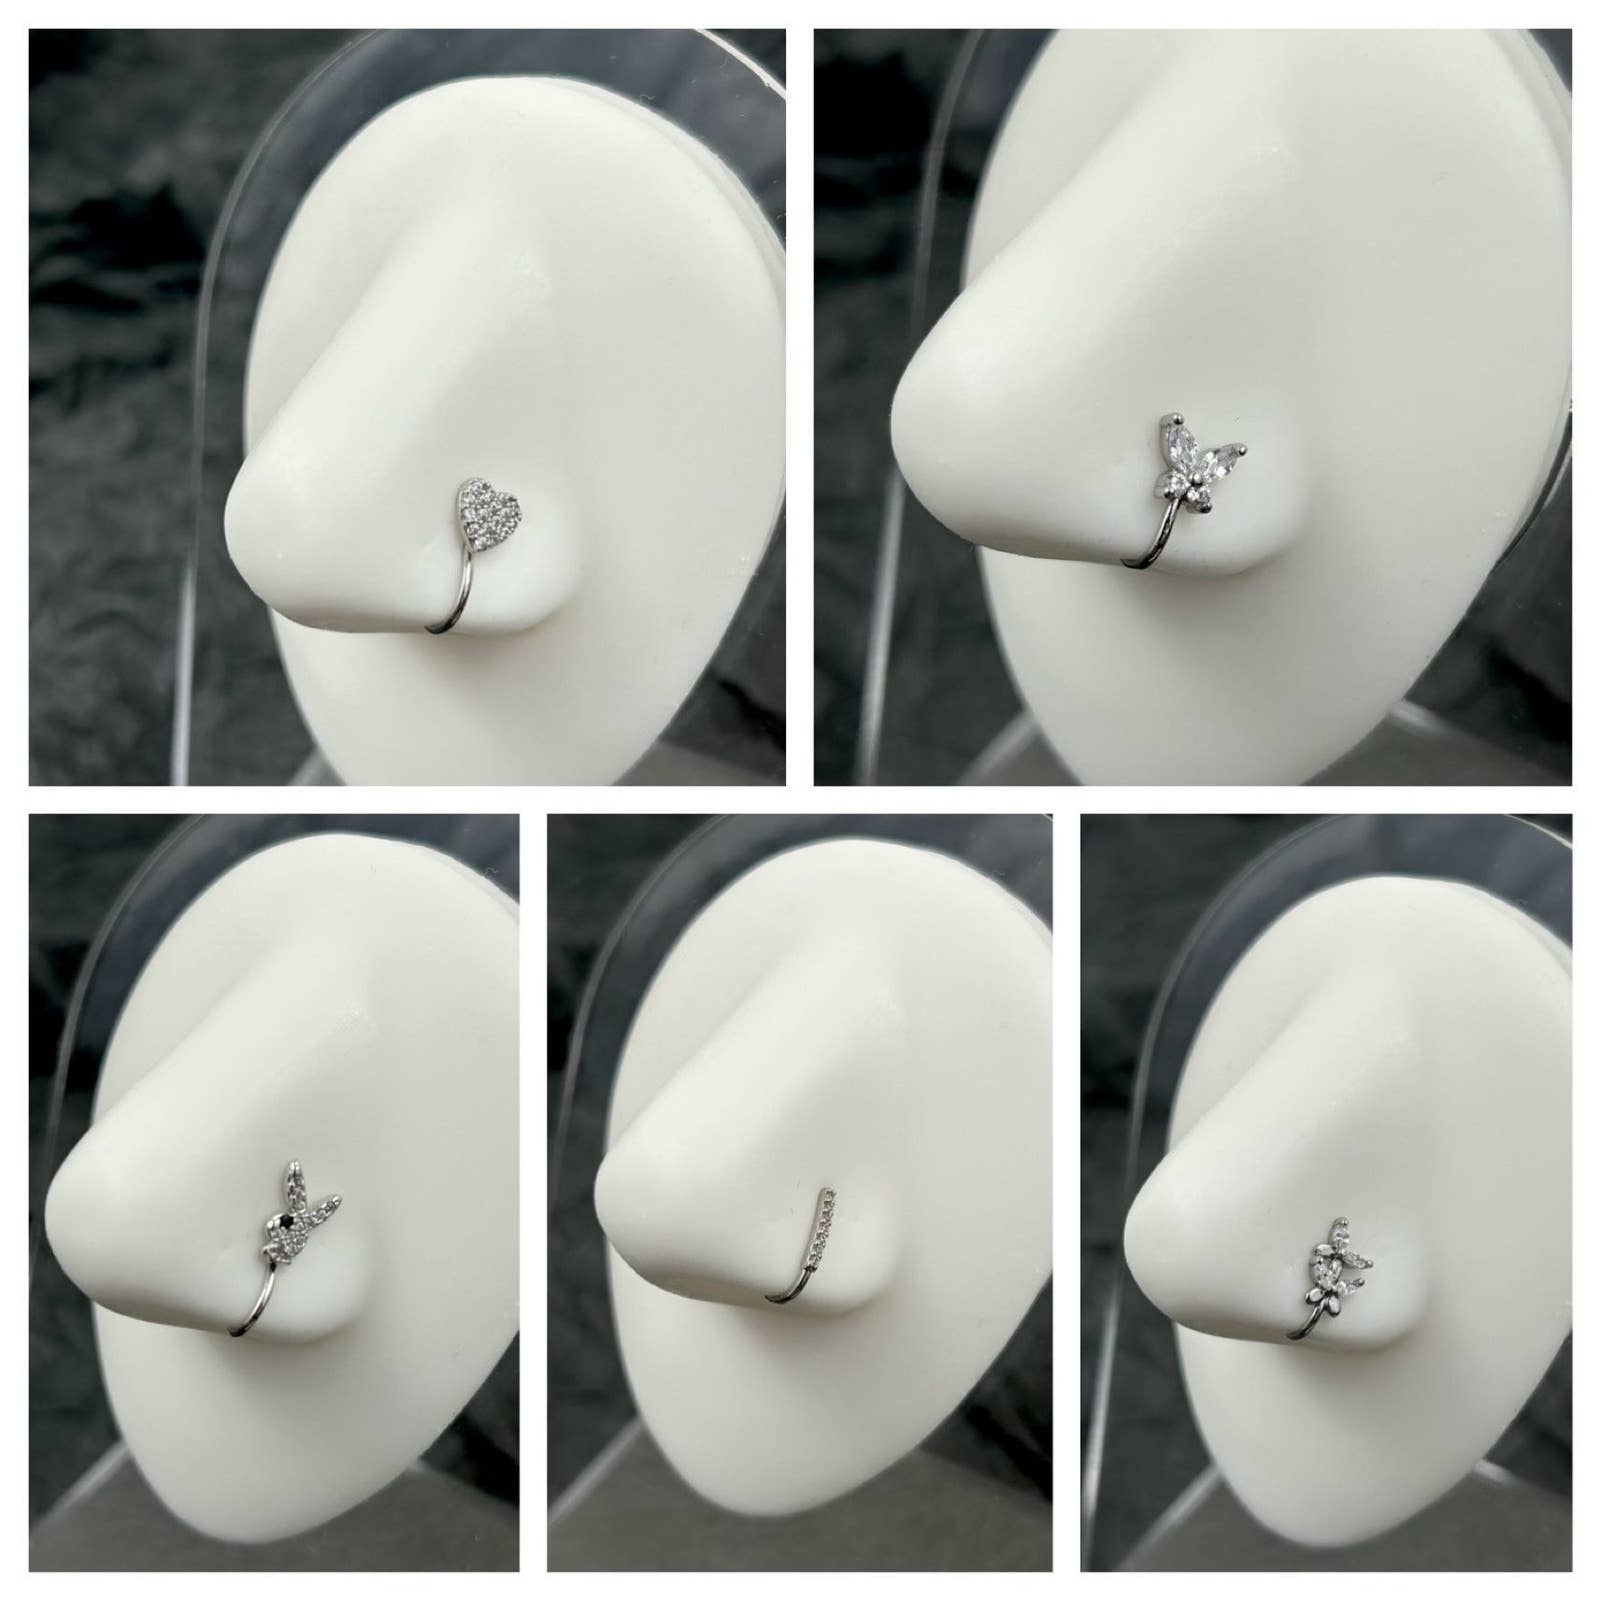 Set of 5 Nose Cuff - Variety Pack Non-Piercing Nose Cuffs